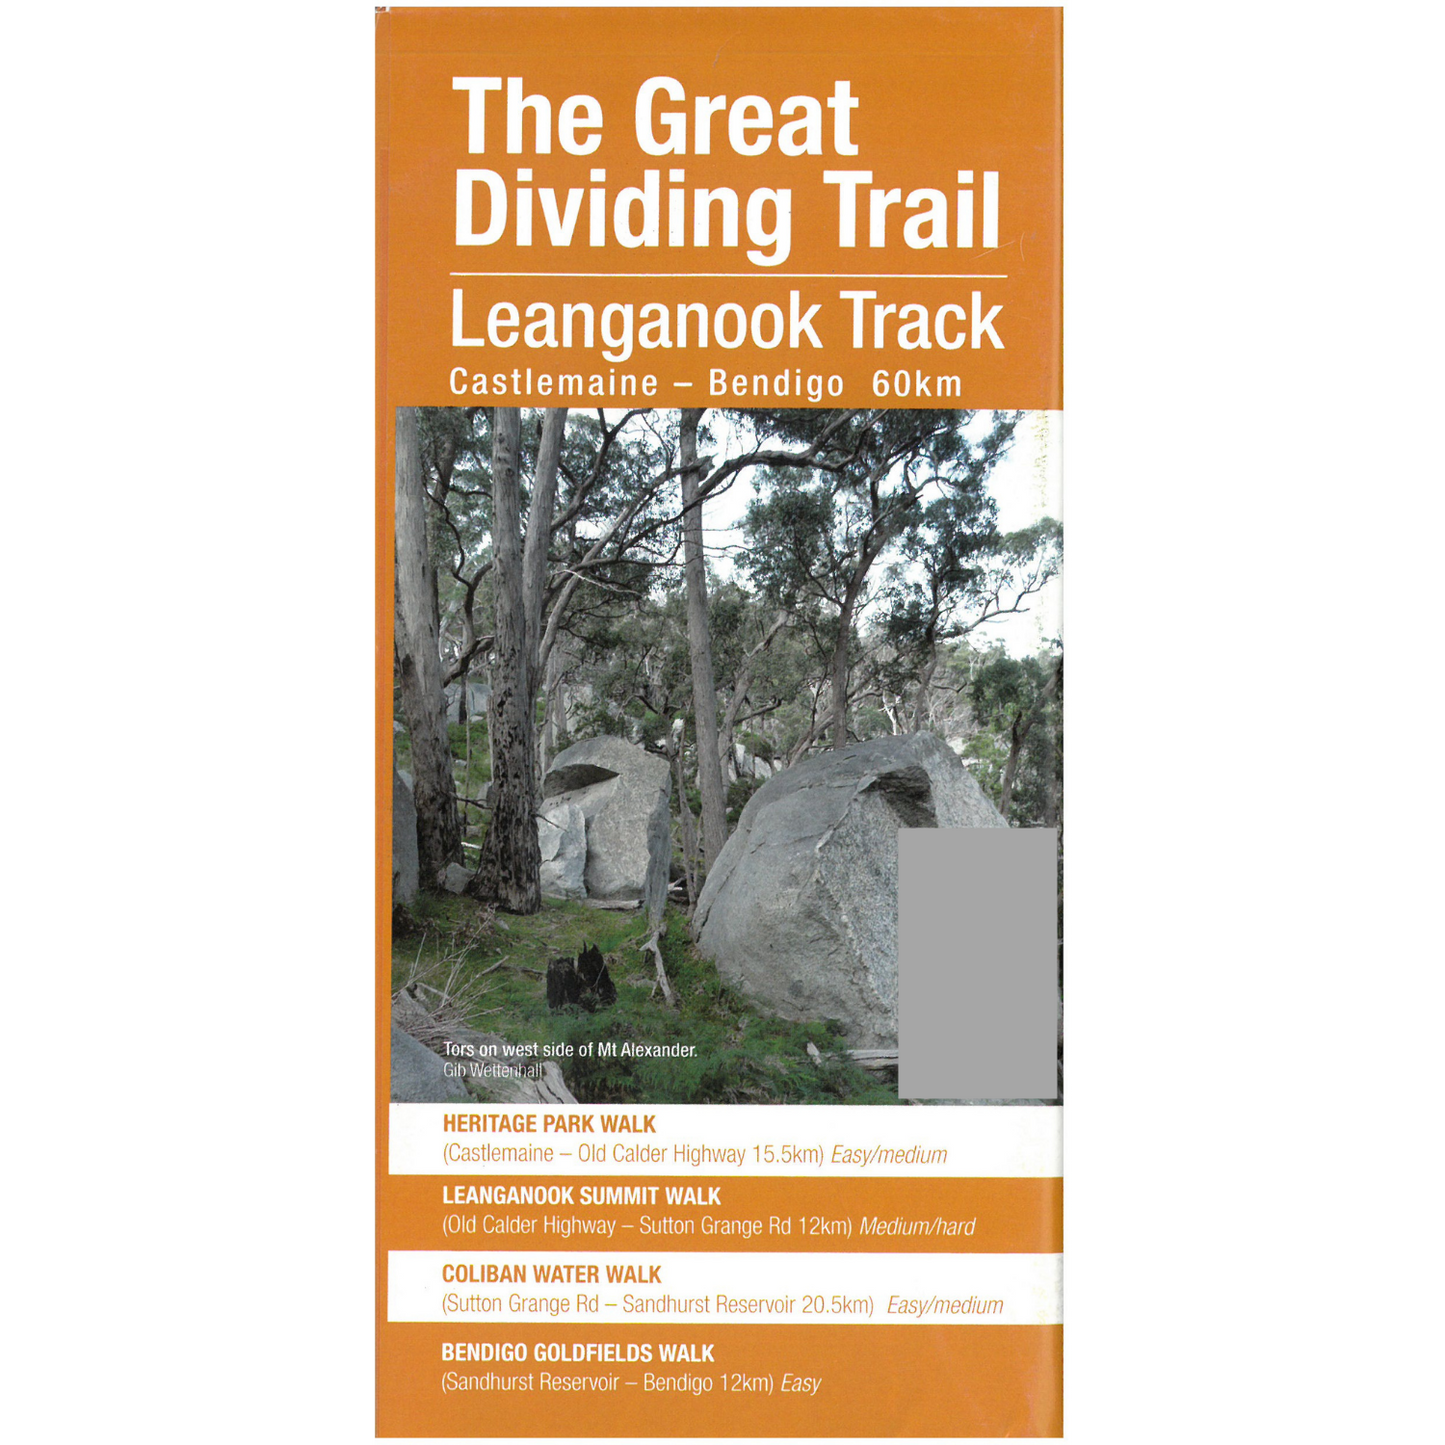 Great Dividing Trail- Leanganook Track